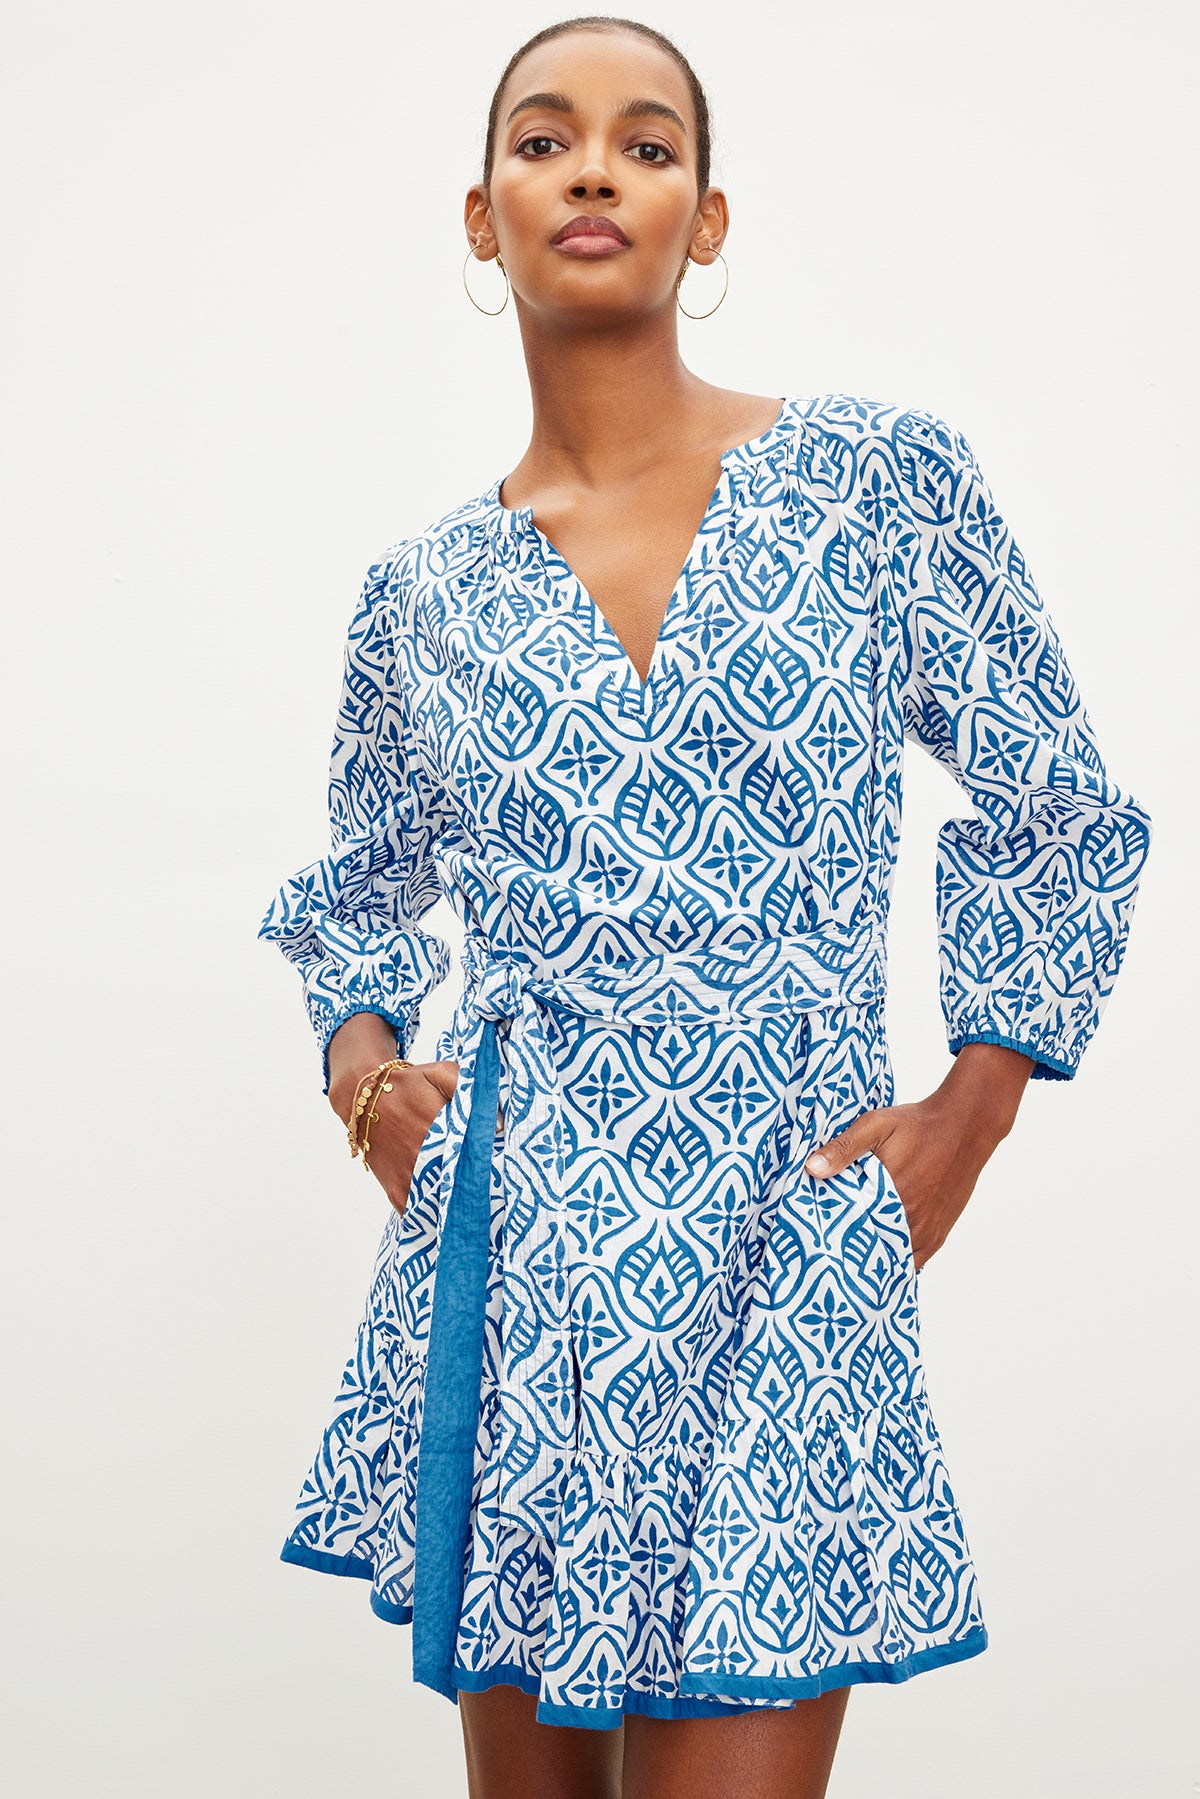   The model is wearing a blue and white KENLEY PRINTED BOHO DRESS made of cotton by Velvet by Graham & Spencer. 